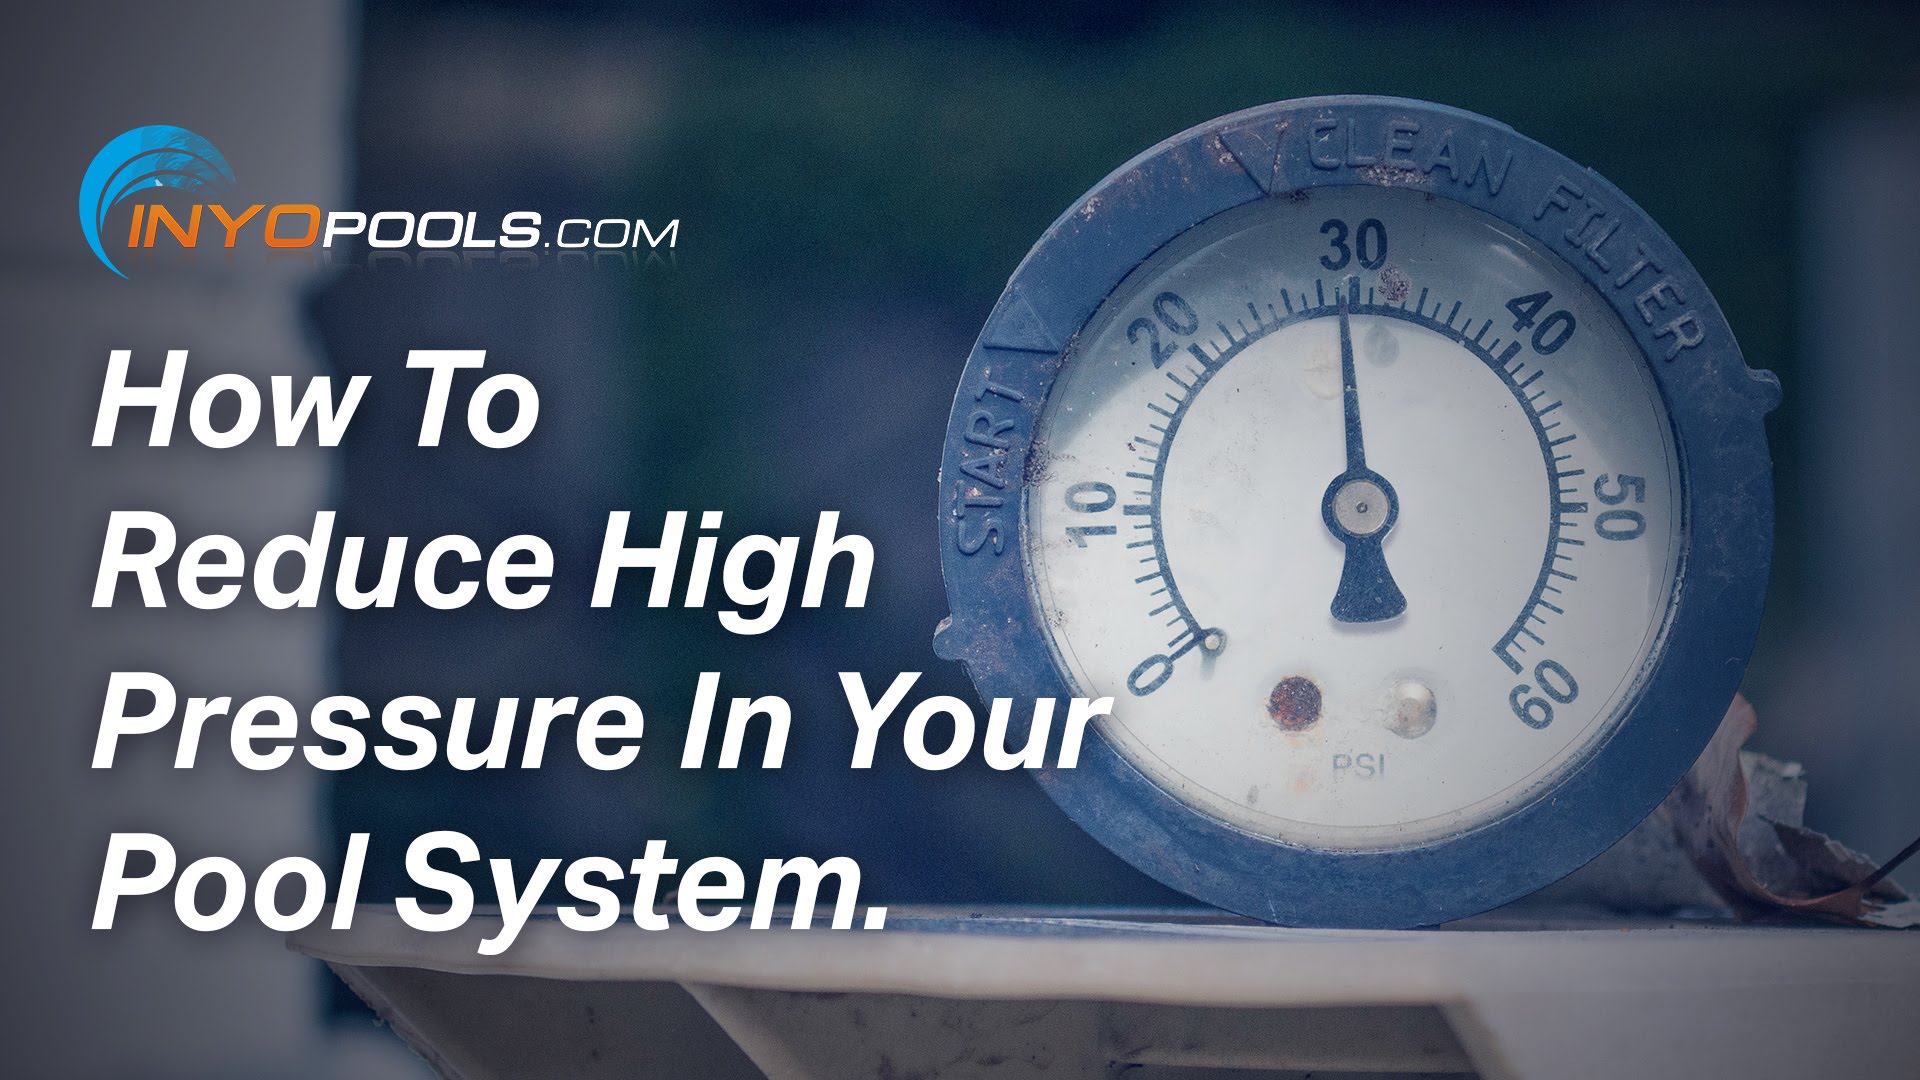 Reducing High Pressure In Your Pool System - INYOPools.com ...